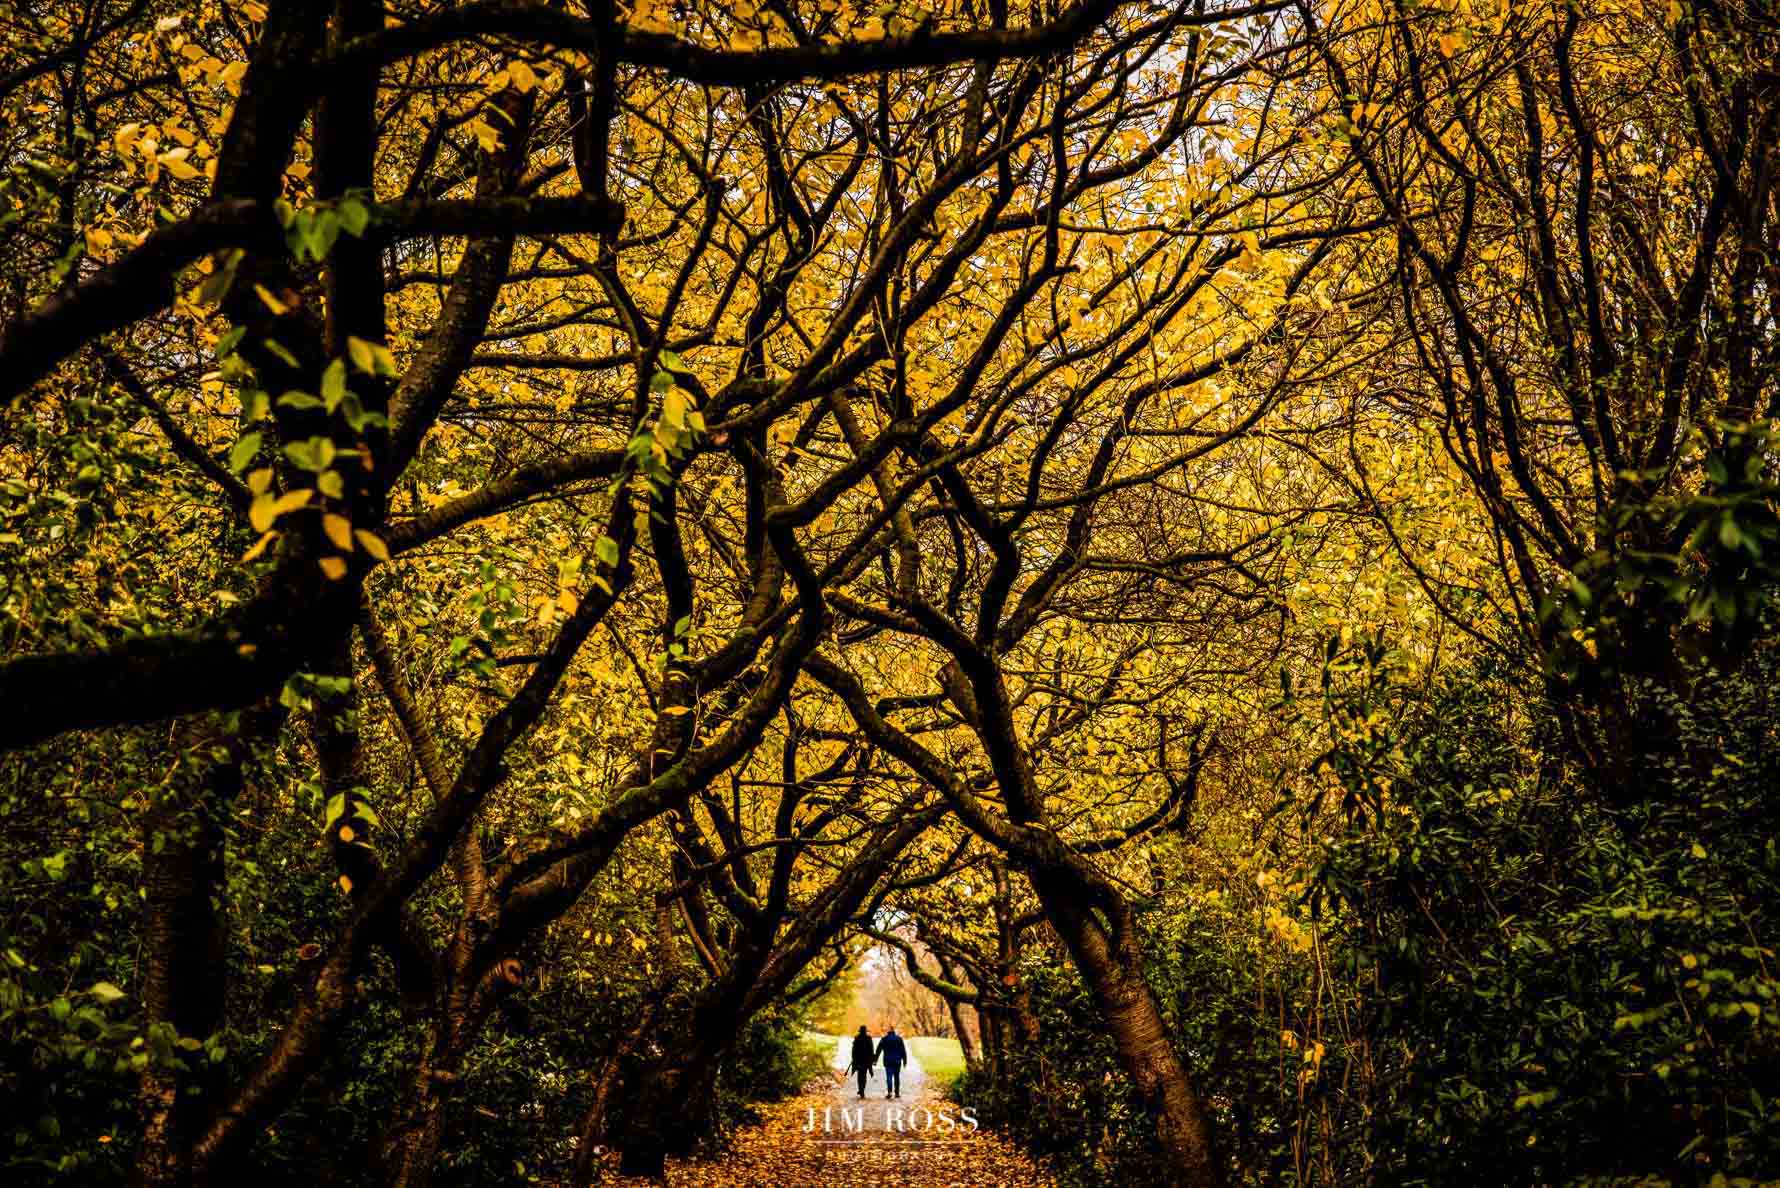 Small silhouette of couple in large tree canopy scene